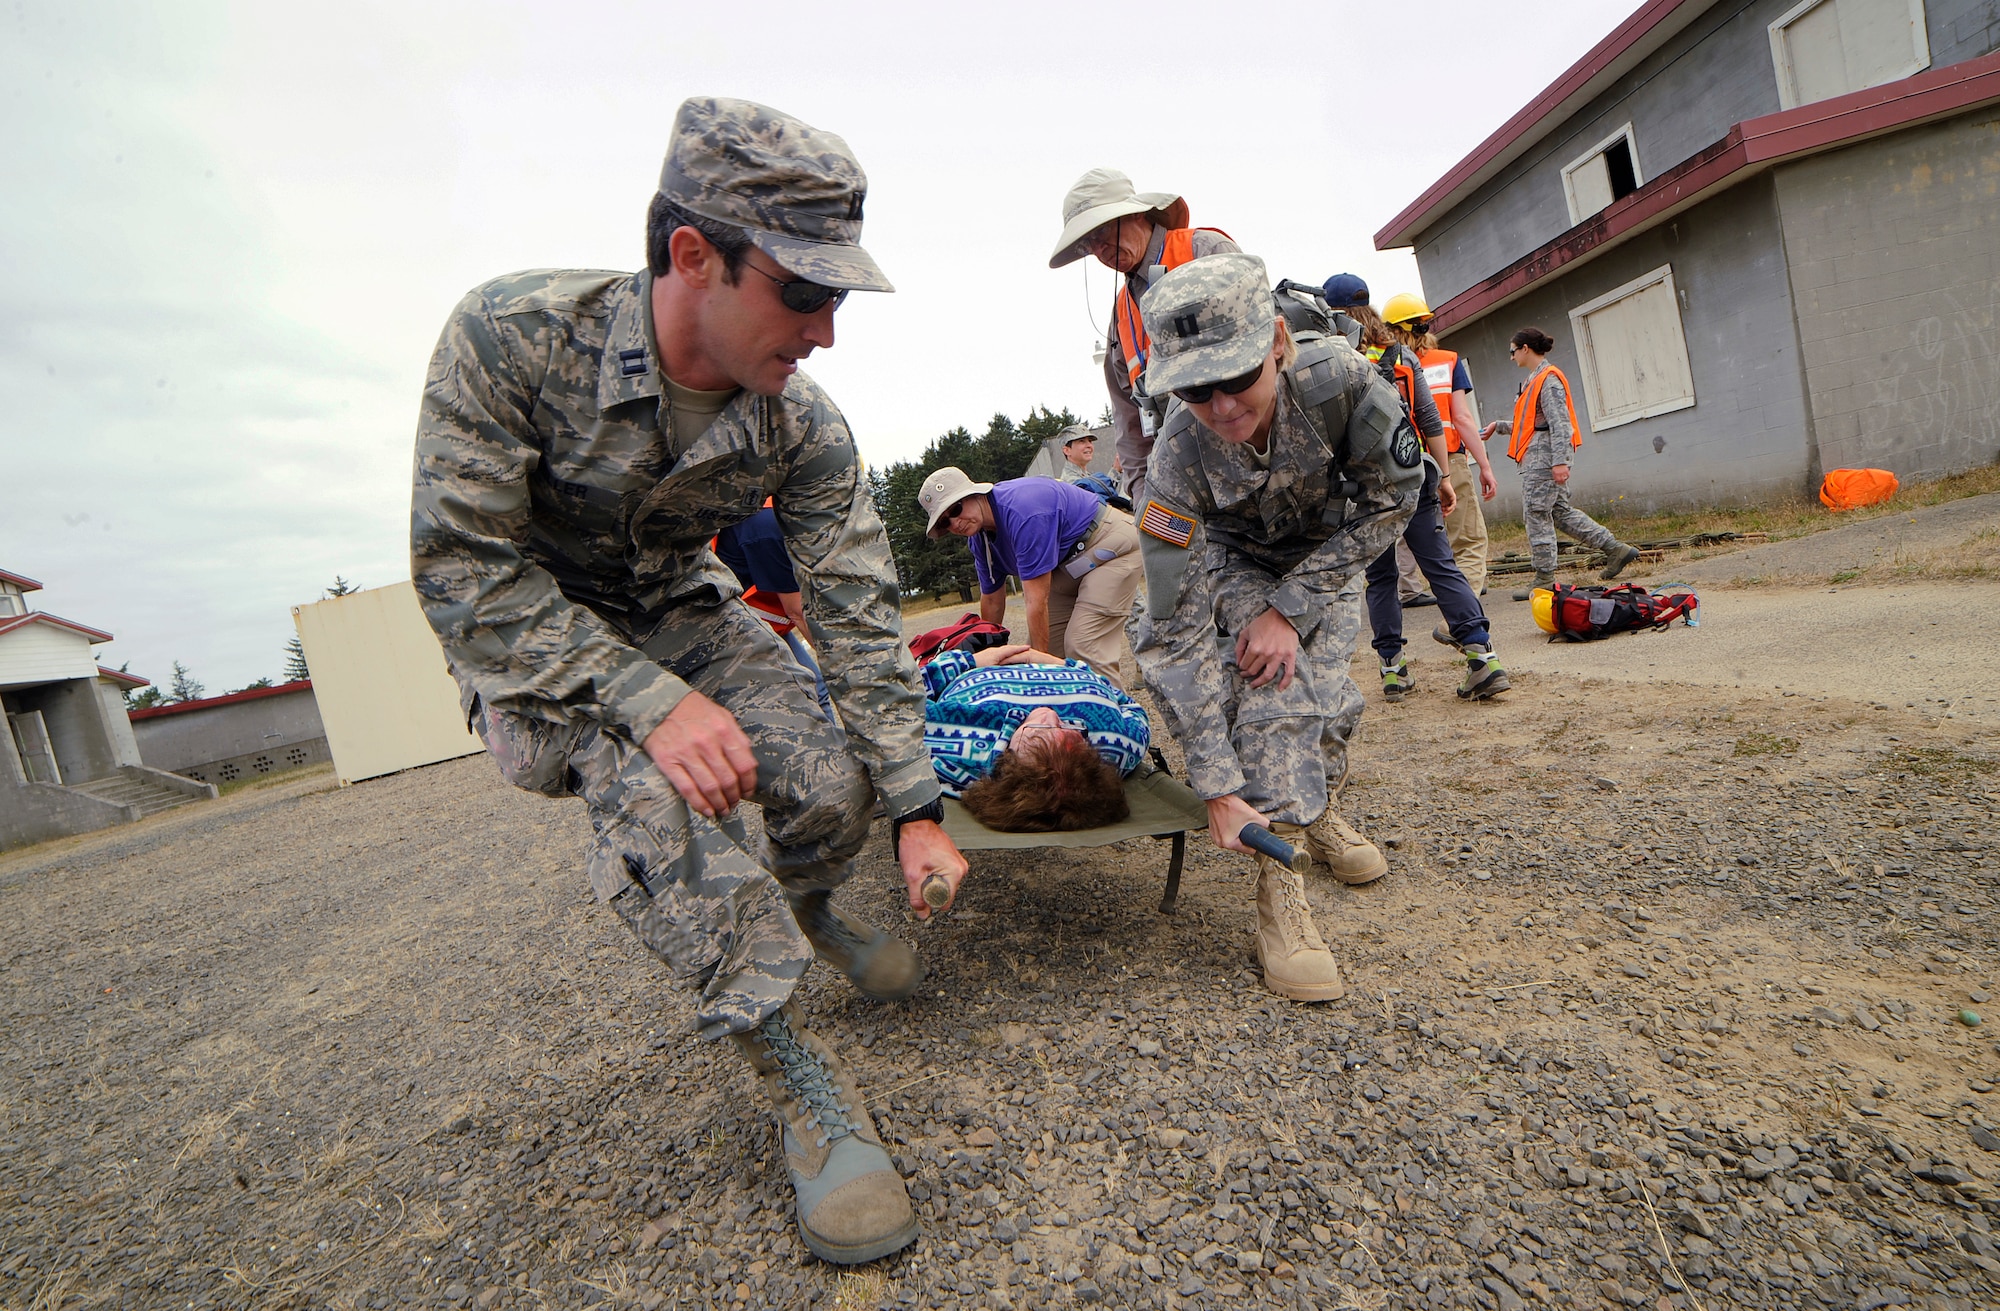 Capt. Jonathon Miller, with the 124th Fighter Wing Medical Group, Idaho Air National Guard, left, and Oregon Army National Guard Capt. Amy Kerfoot, right, lift a simulated casualty during Pathfinder-Minutemen Exercise Aug. 5, 2015 at Camp Rilea in Warrenton, Oregon. The event is a joint multi-agency, multi-state disaster preparedness exercise based on response to a possible Cascadia Subduction Zone event. Officials believe the Northwest is overdue for a magnitude 7.0 or greater earthquake. (U.S. Air National Guard photo by Tech. Sgt. John Hughel, 142nd Fighter Wing Public Affairs/Released)